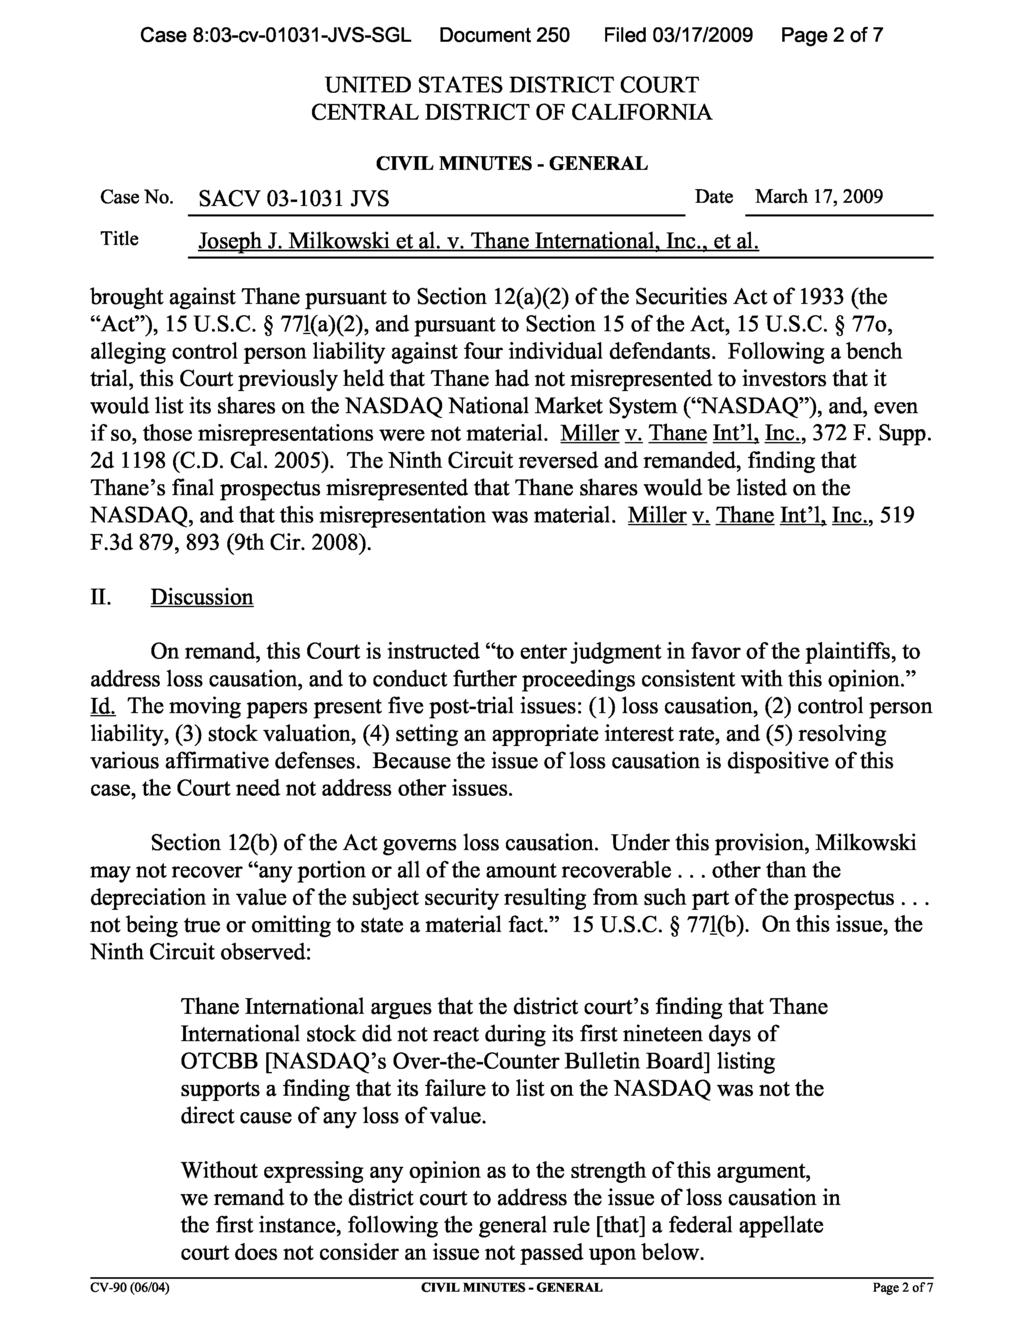 Case 8:03-cv-01031-JVS-SGL Document 250 Filed 03/17/2009 Page 2 of 7 brought against Thane pursuant to Section 12(a)(2) of the Securities Act of 1933 (the Act ), 15 U.S.C. 77l(a)(2), and pursuant to Section 15 of the Act, 15 U.